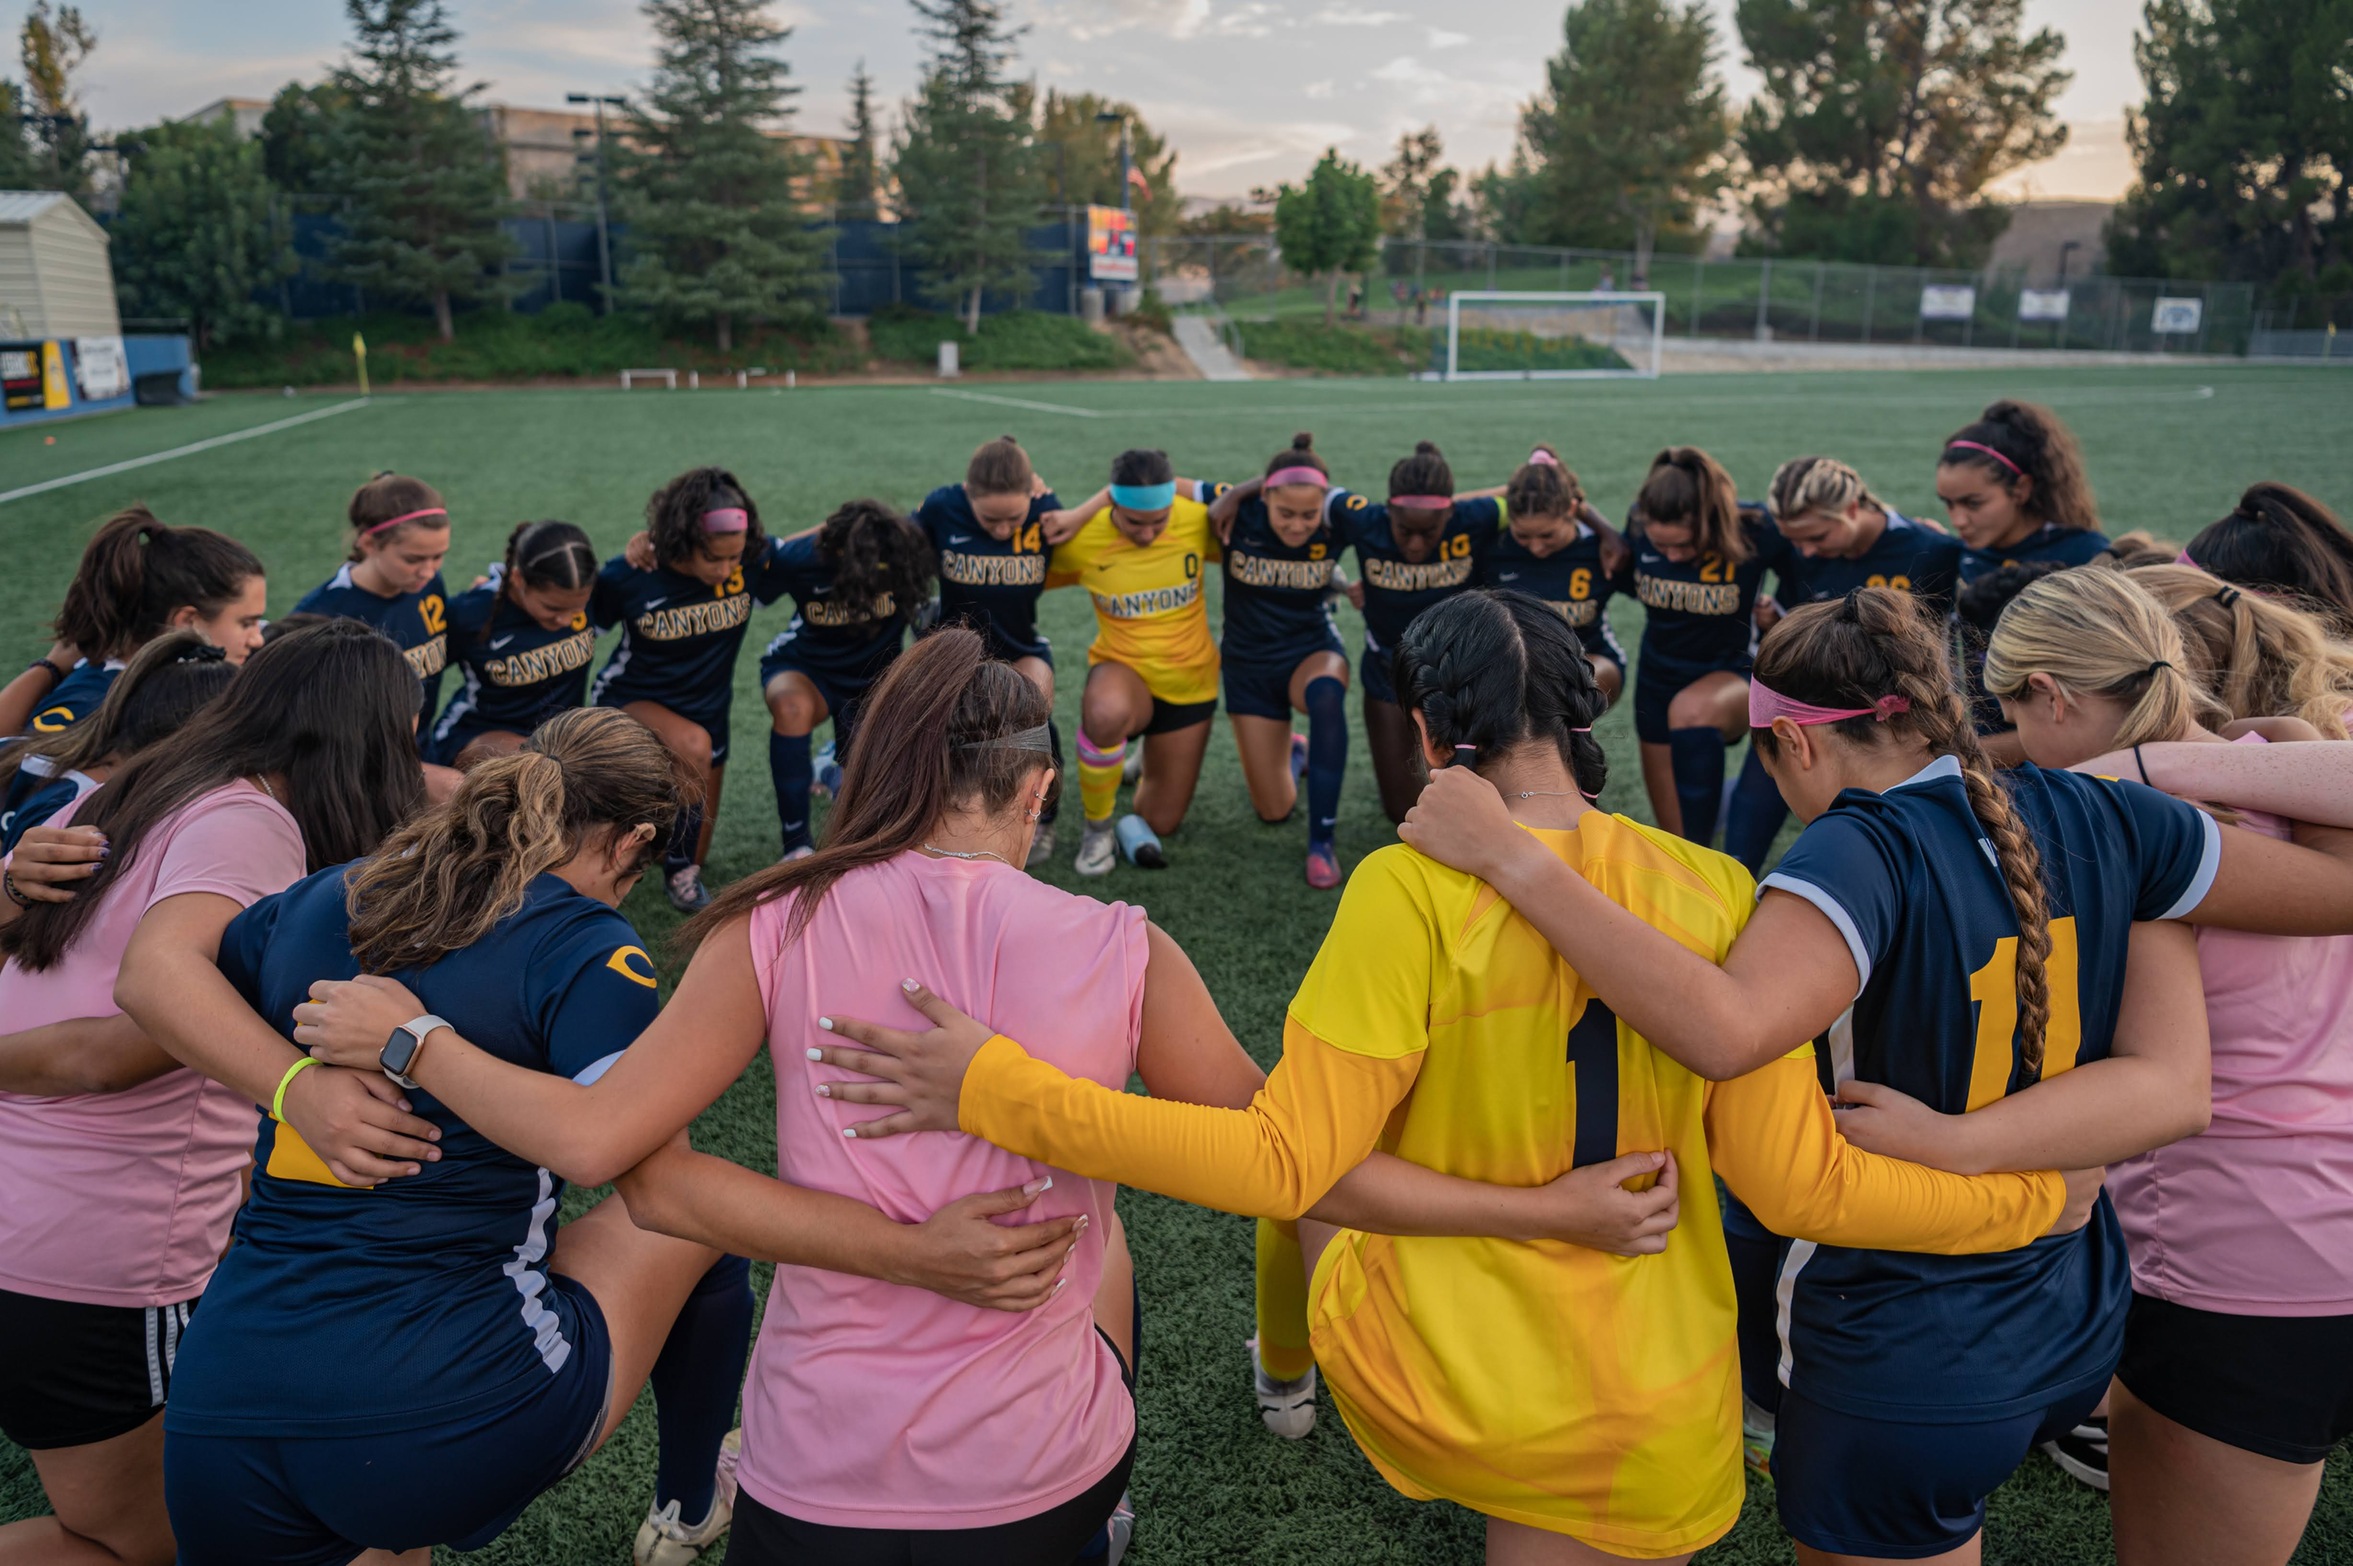 College of the Canyons women's soccer team stock image.